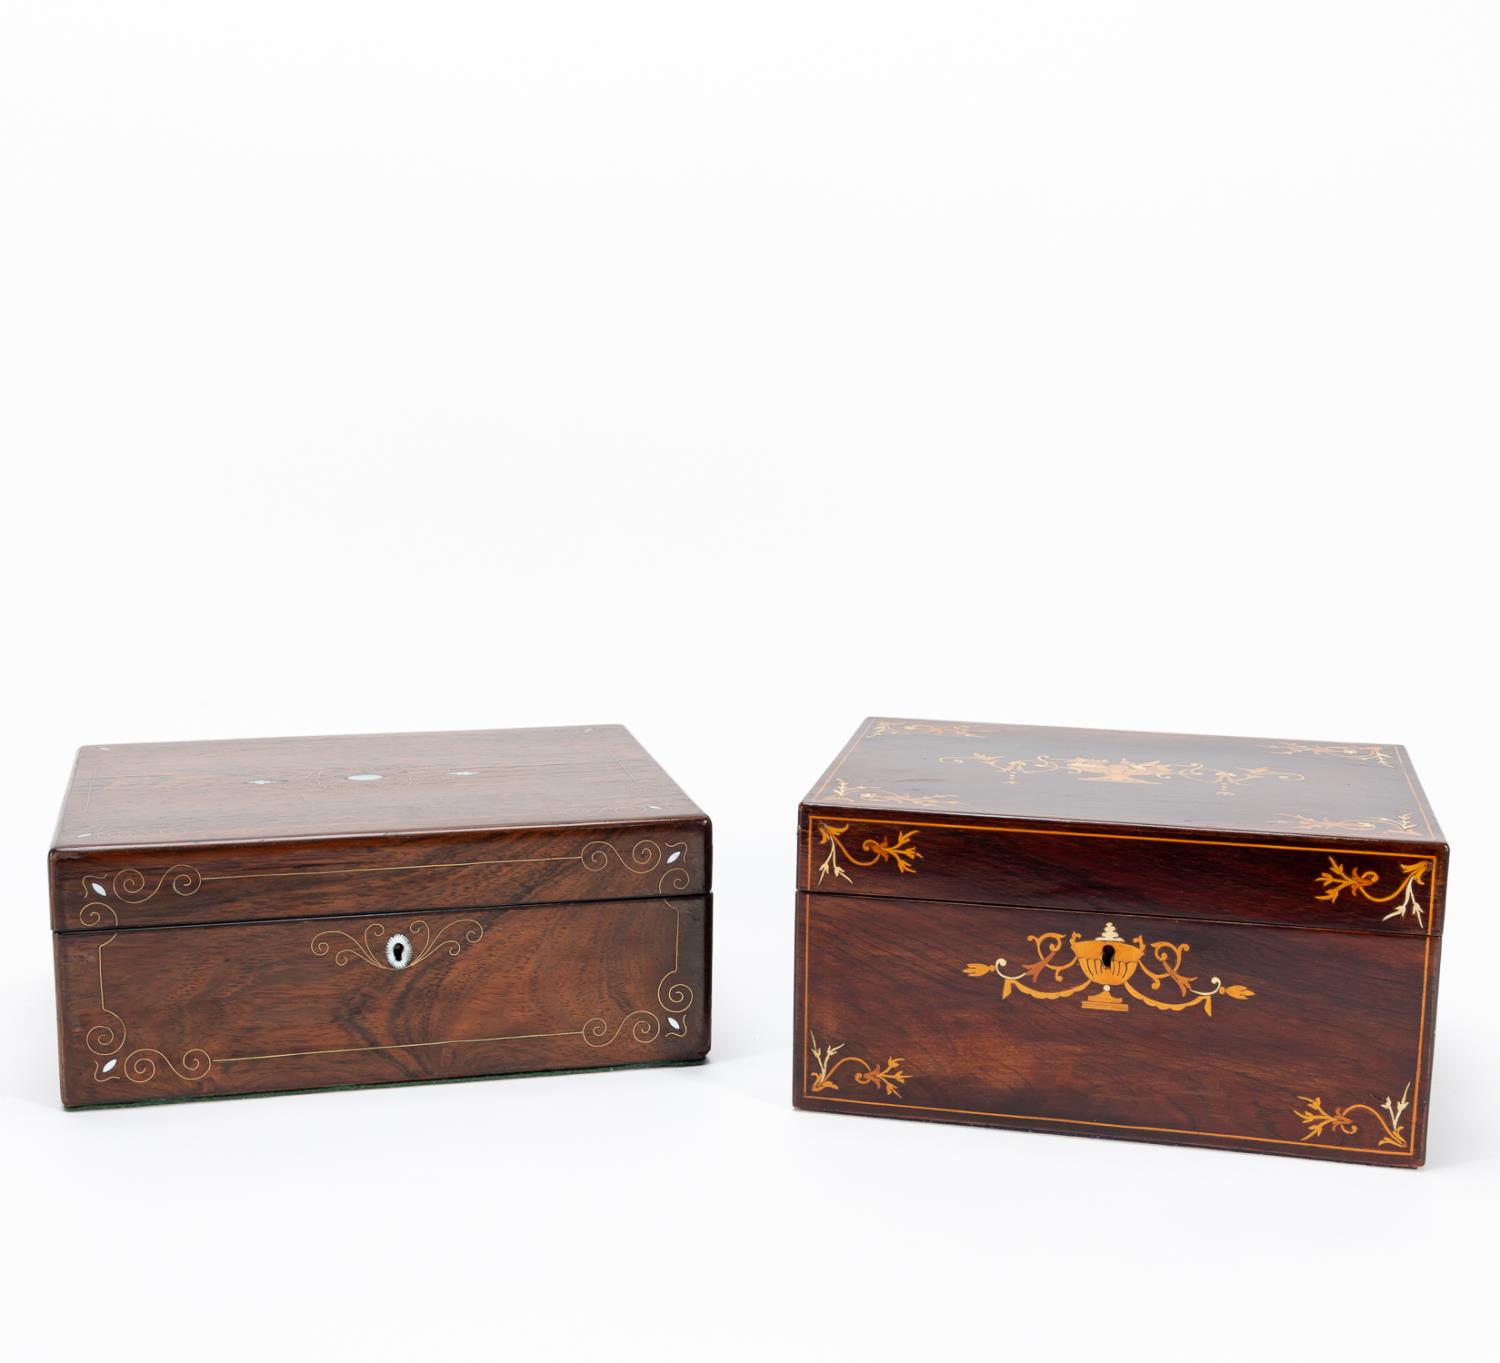 TWO PIECES, 19TH C ENGLISH INLAID